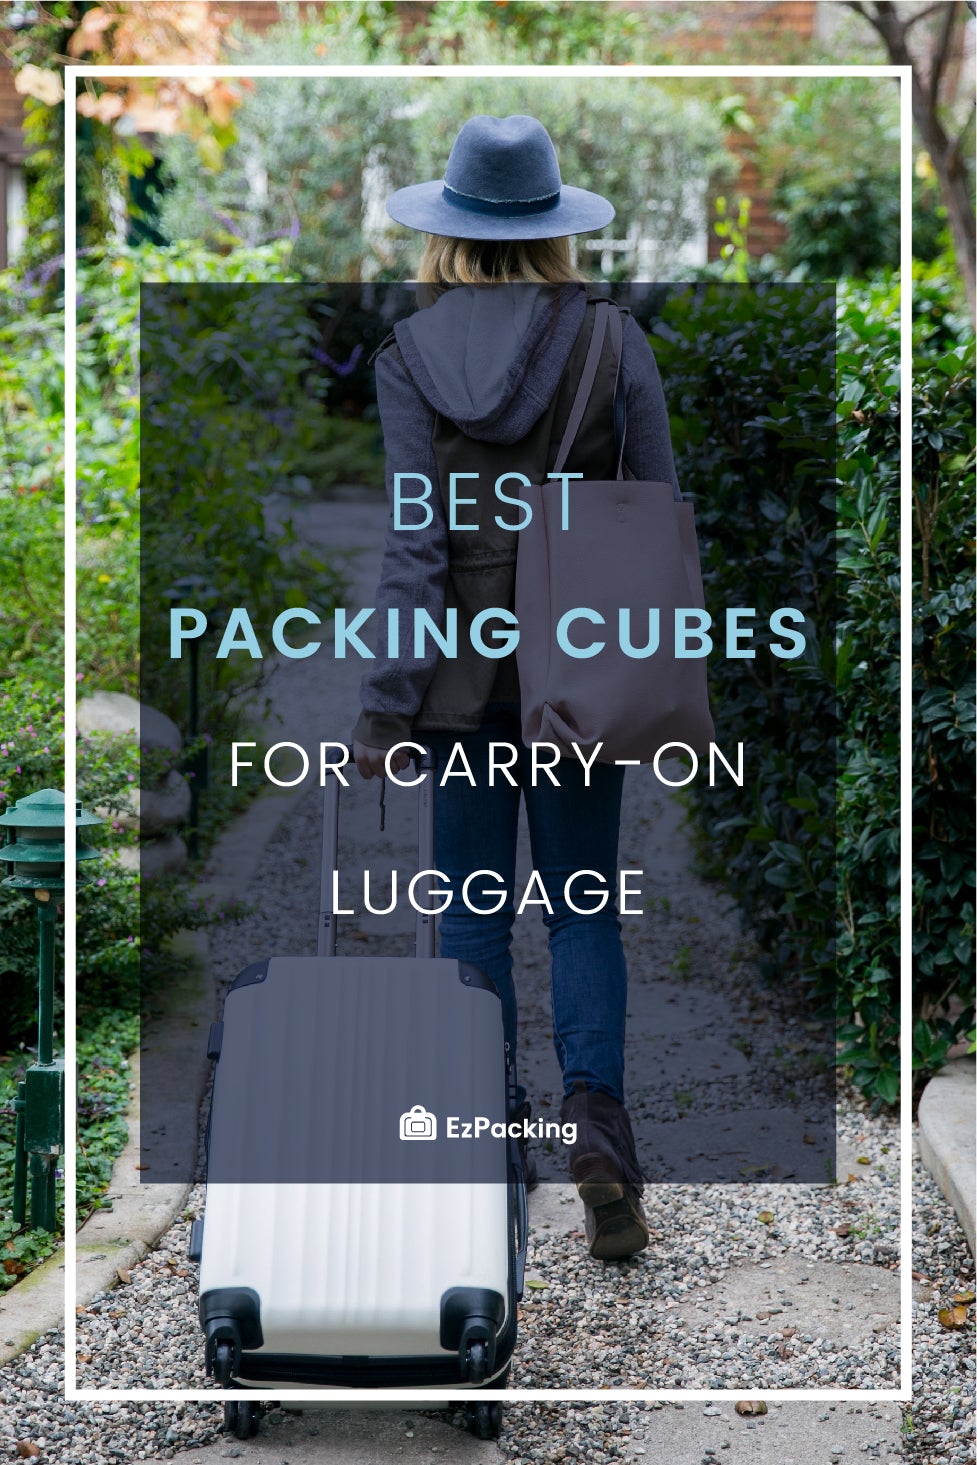 Best packing cubes for carry-on luggage